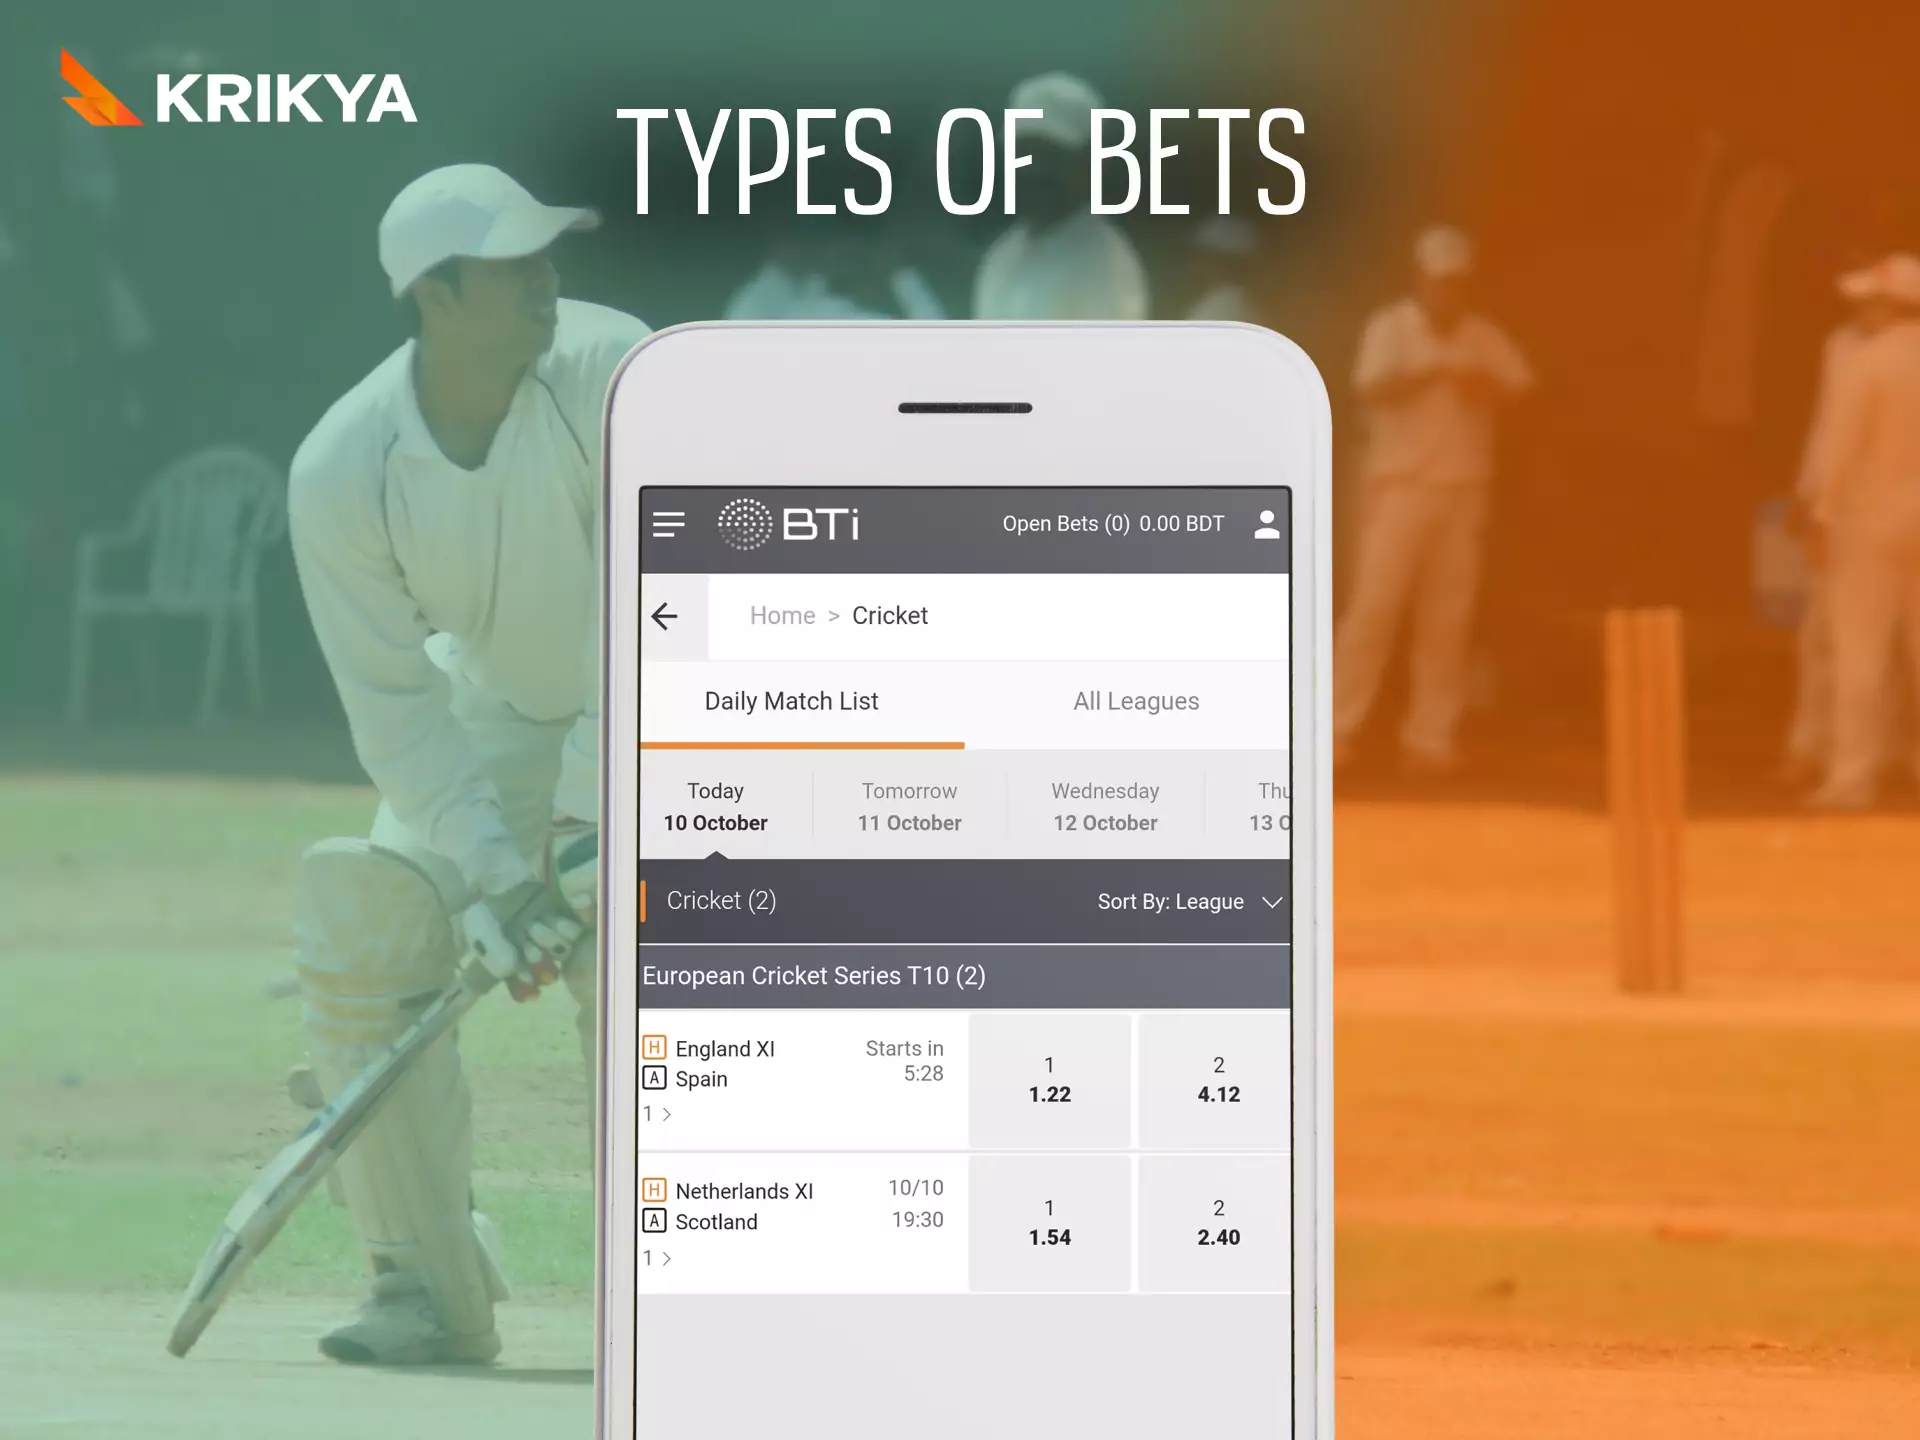 Try out different types of bets in the Krikya app and find the most convenient one.